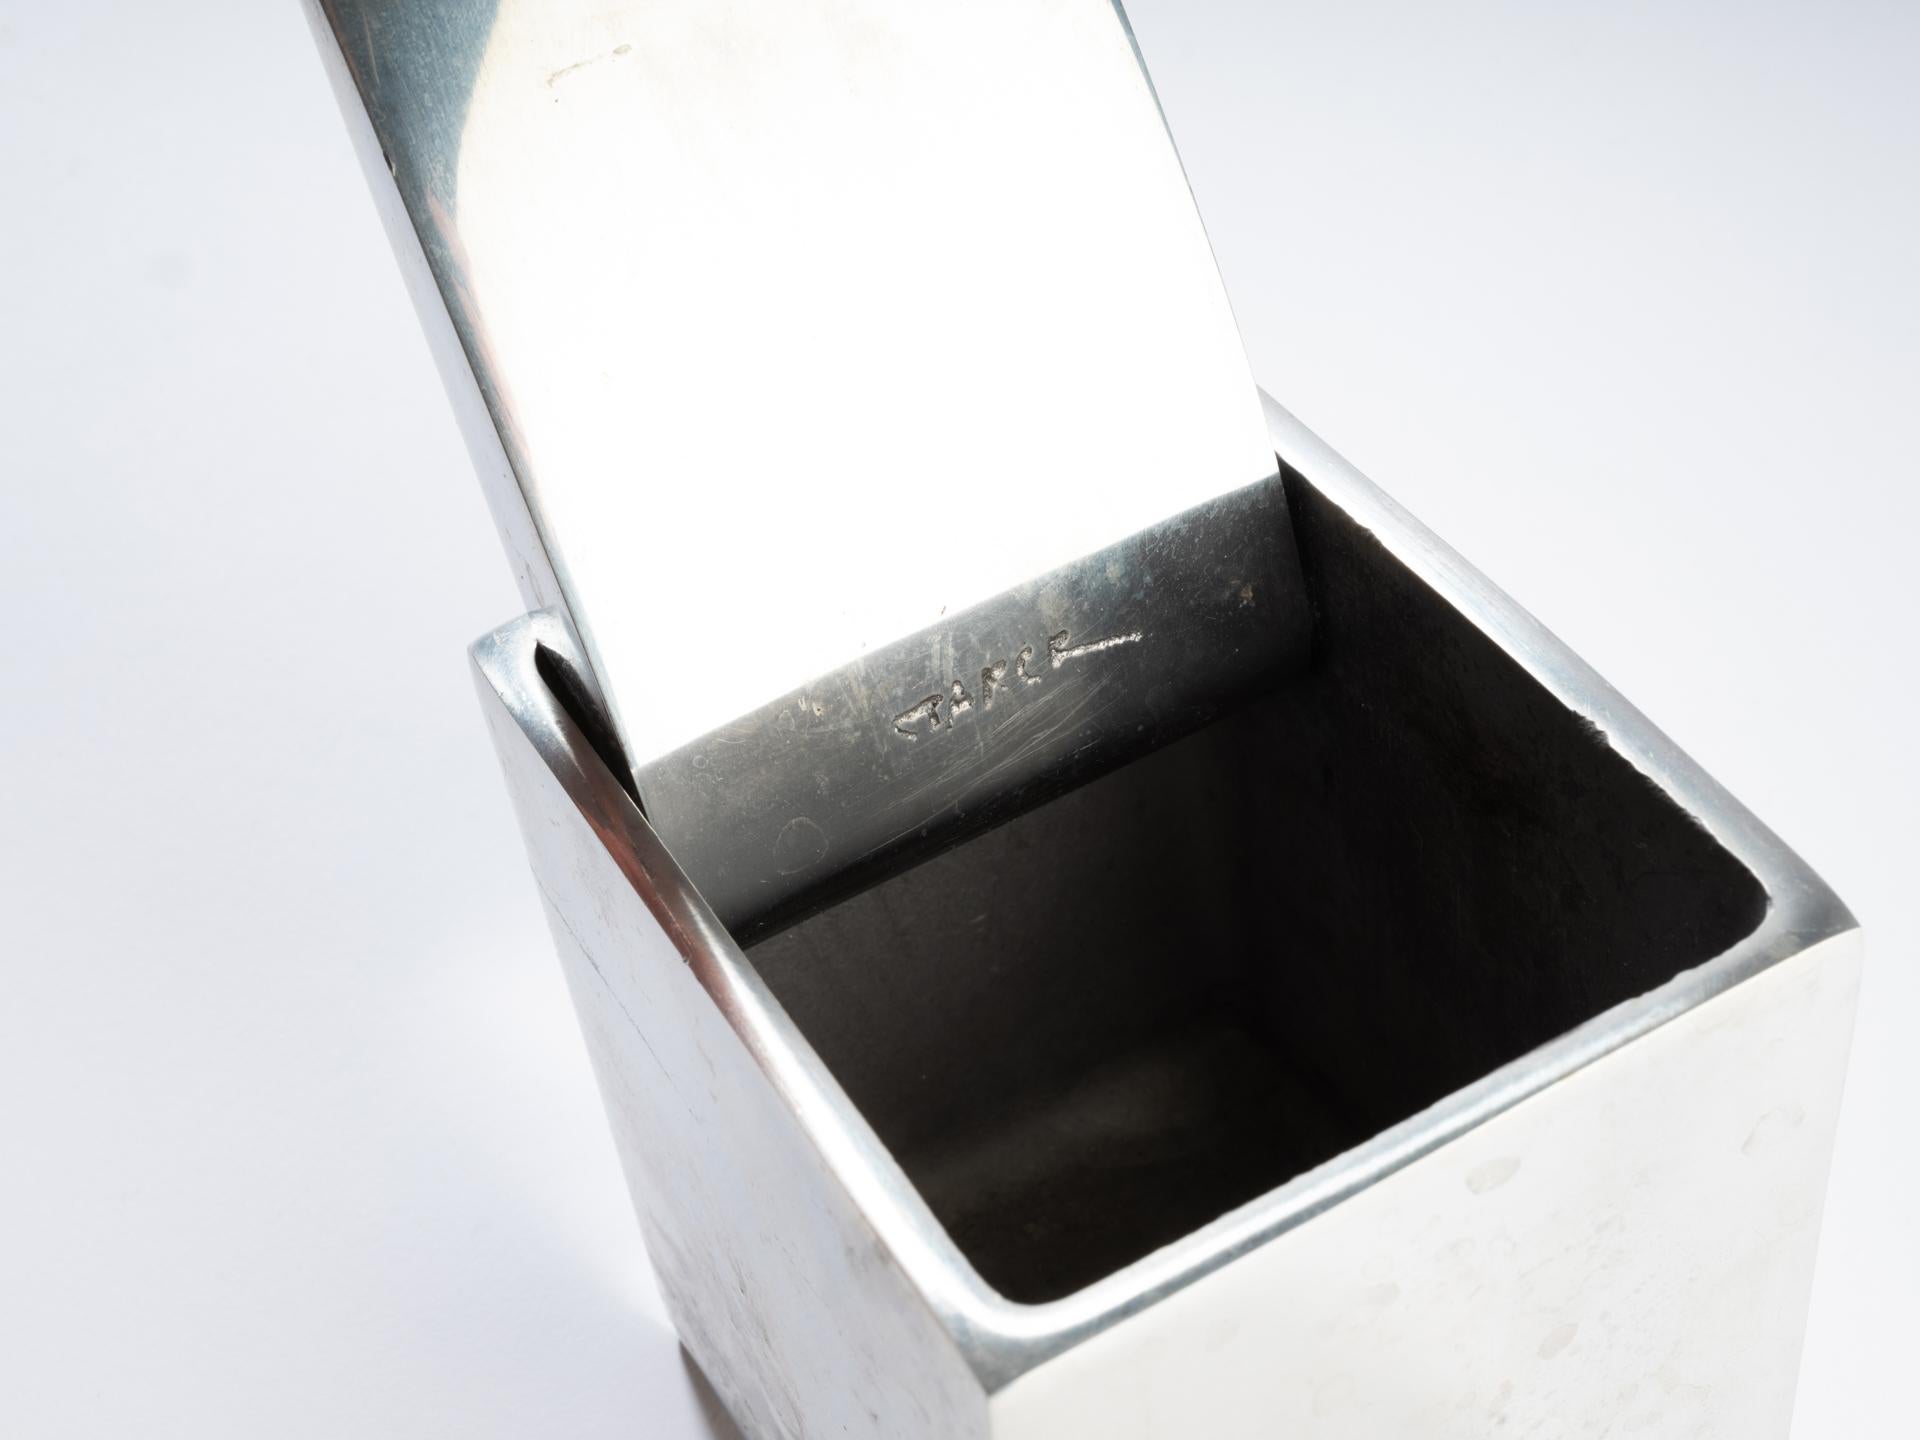 Post-Modern Ray Hollis AshTray by Philippe Starck for the Royalton Hotel in New-York City